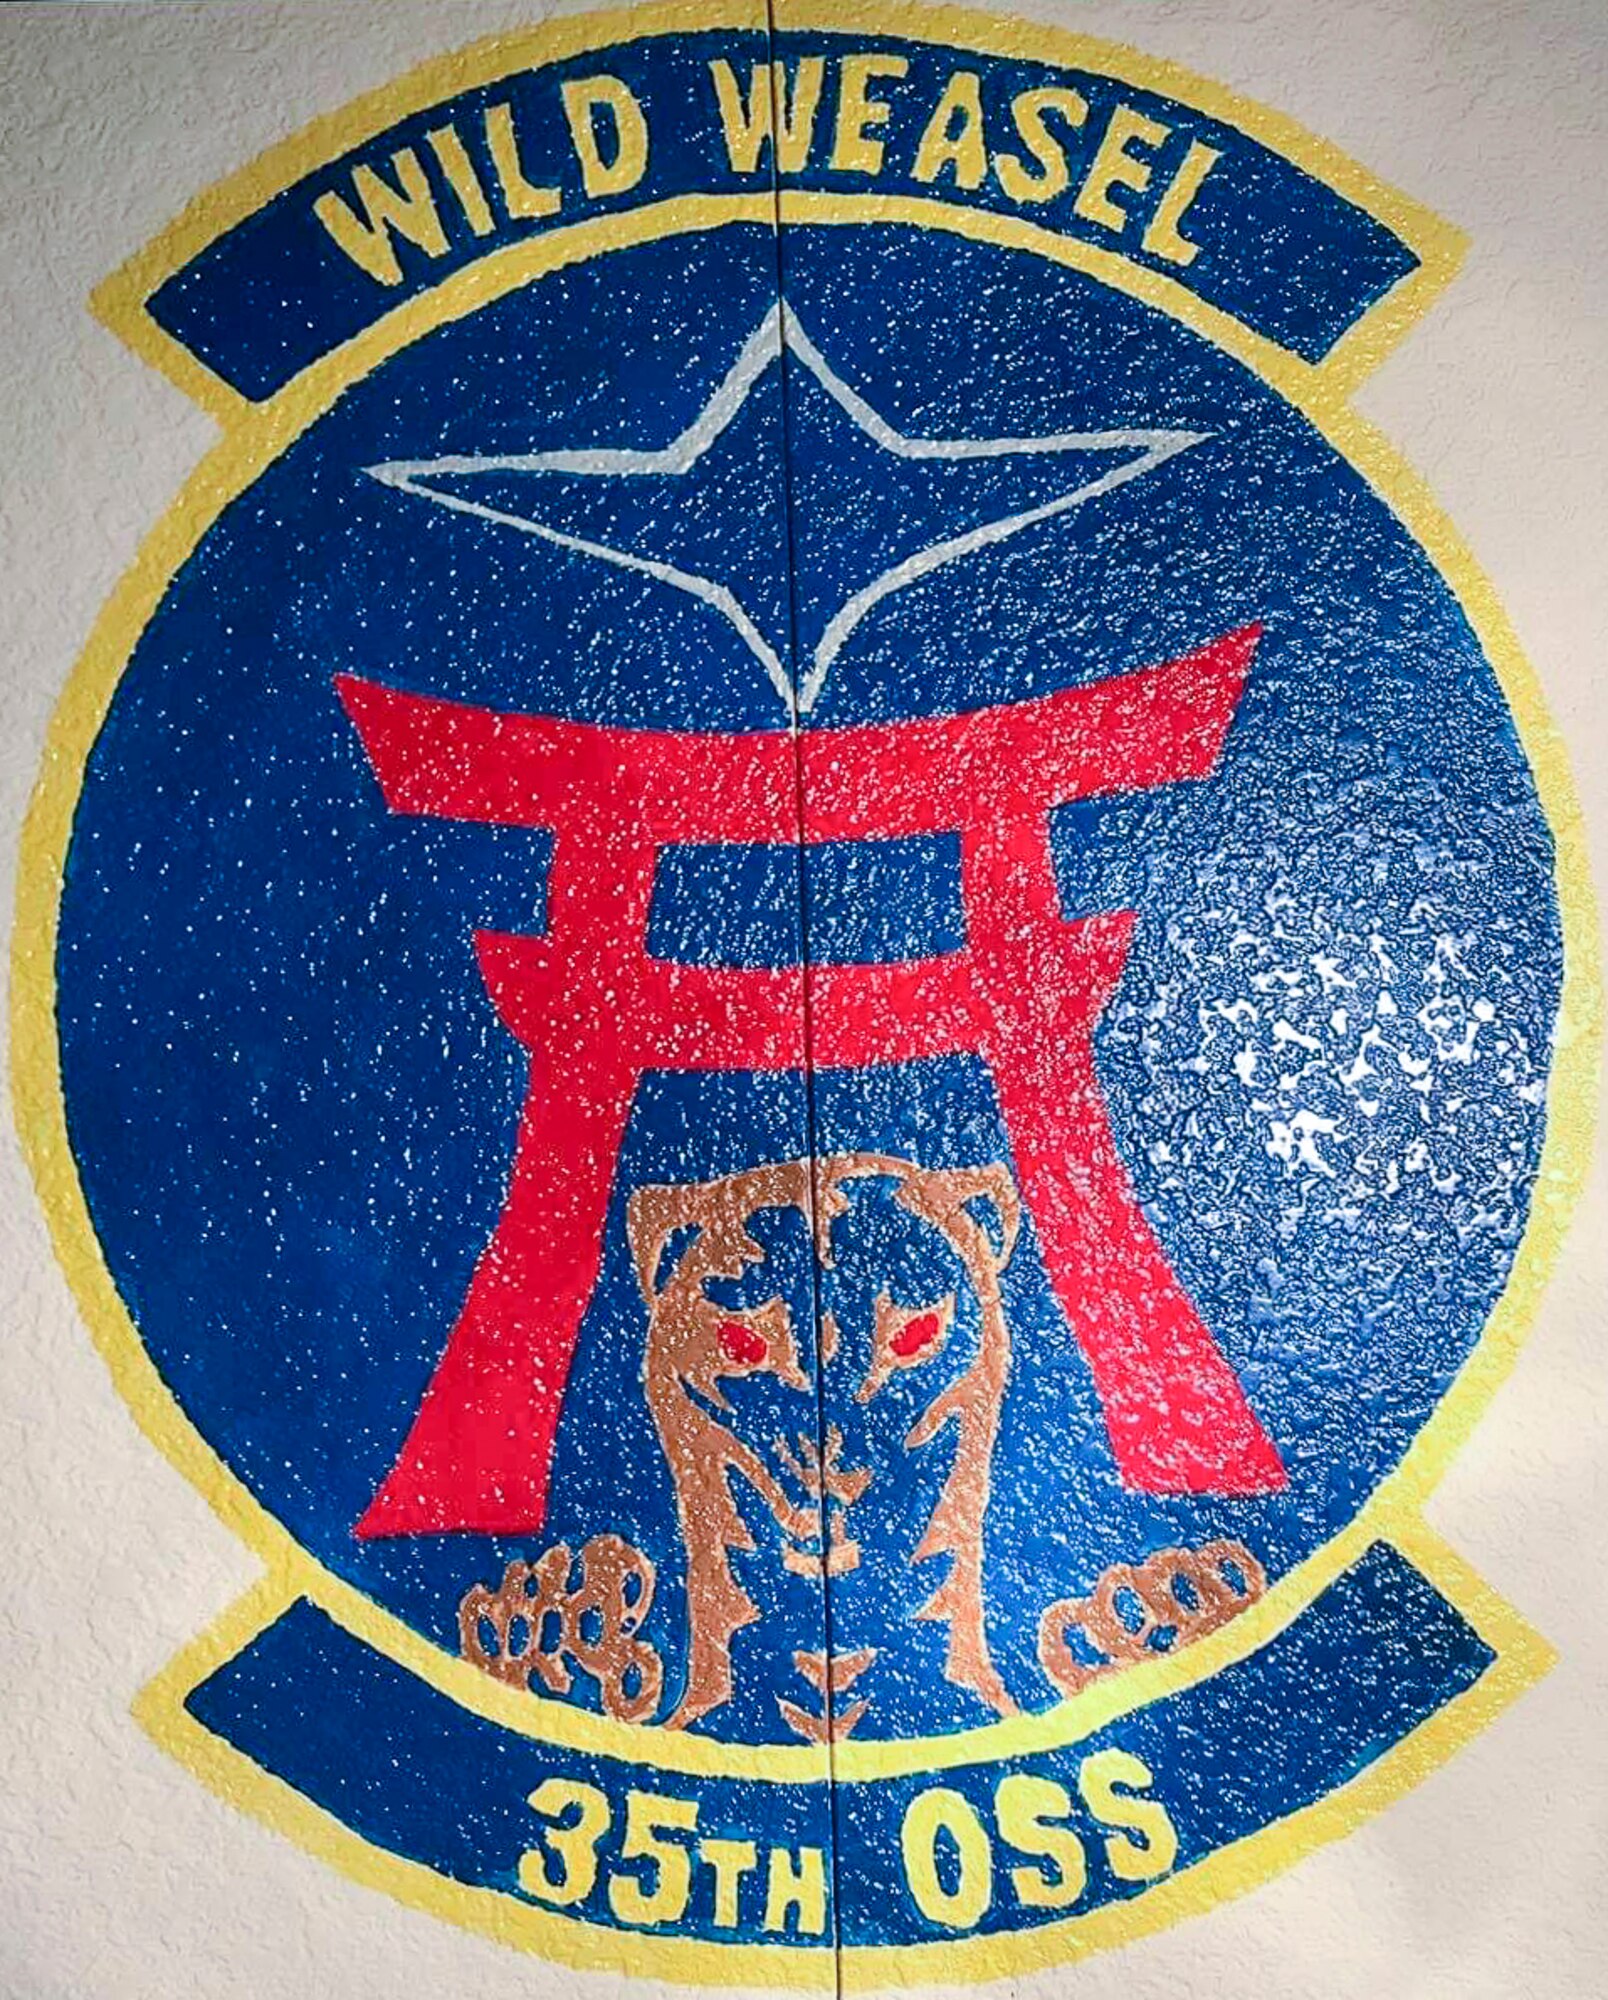 Sharon Smith, the wife of Maj. Brian Smith, a physical therapist with the 35th Medical Operations Squadron, painted the 35th Operations Support Squadron mural at Misawa Air Base, Japan, in 2017. The commander requested her artistic skills to remake the squadron patch into a mural as a way to help create identity and morale in the unit. (Courtesy photo by Sharon Smith)